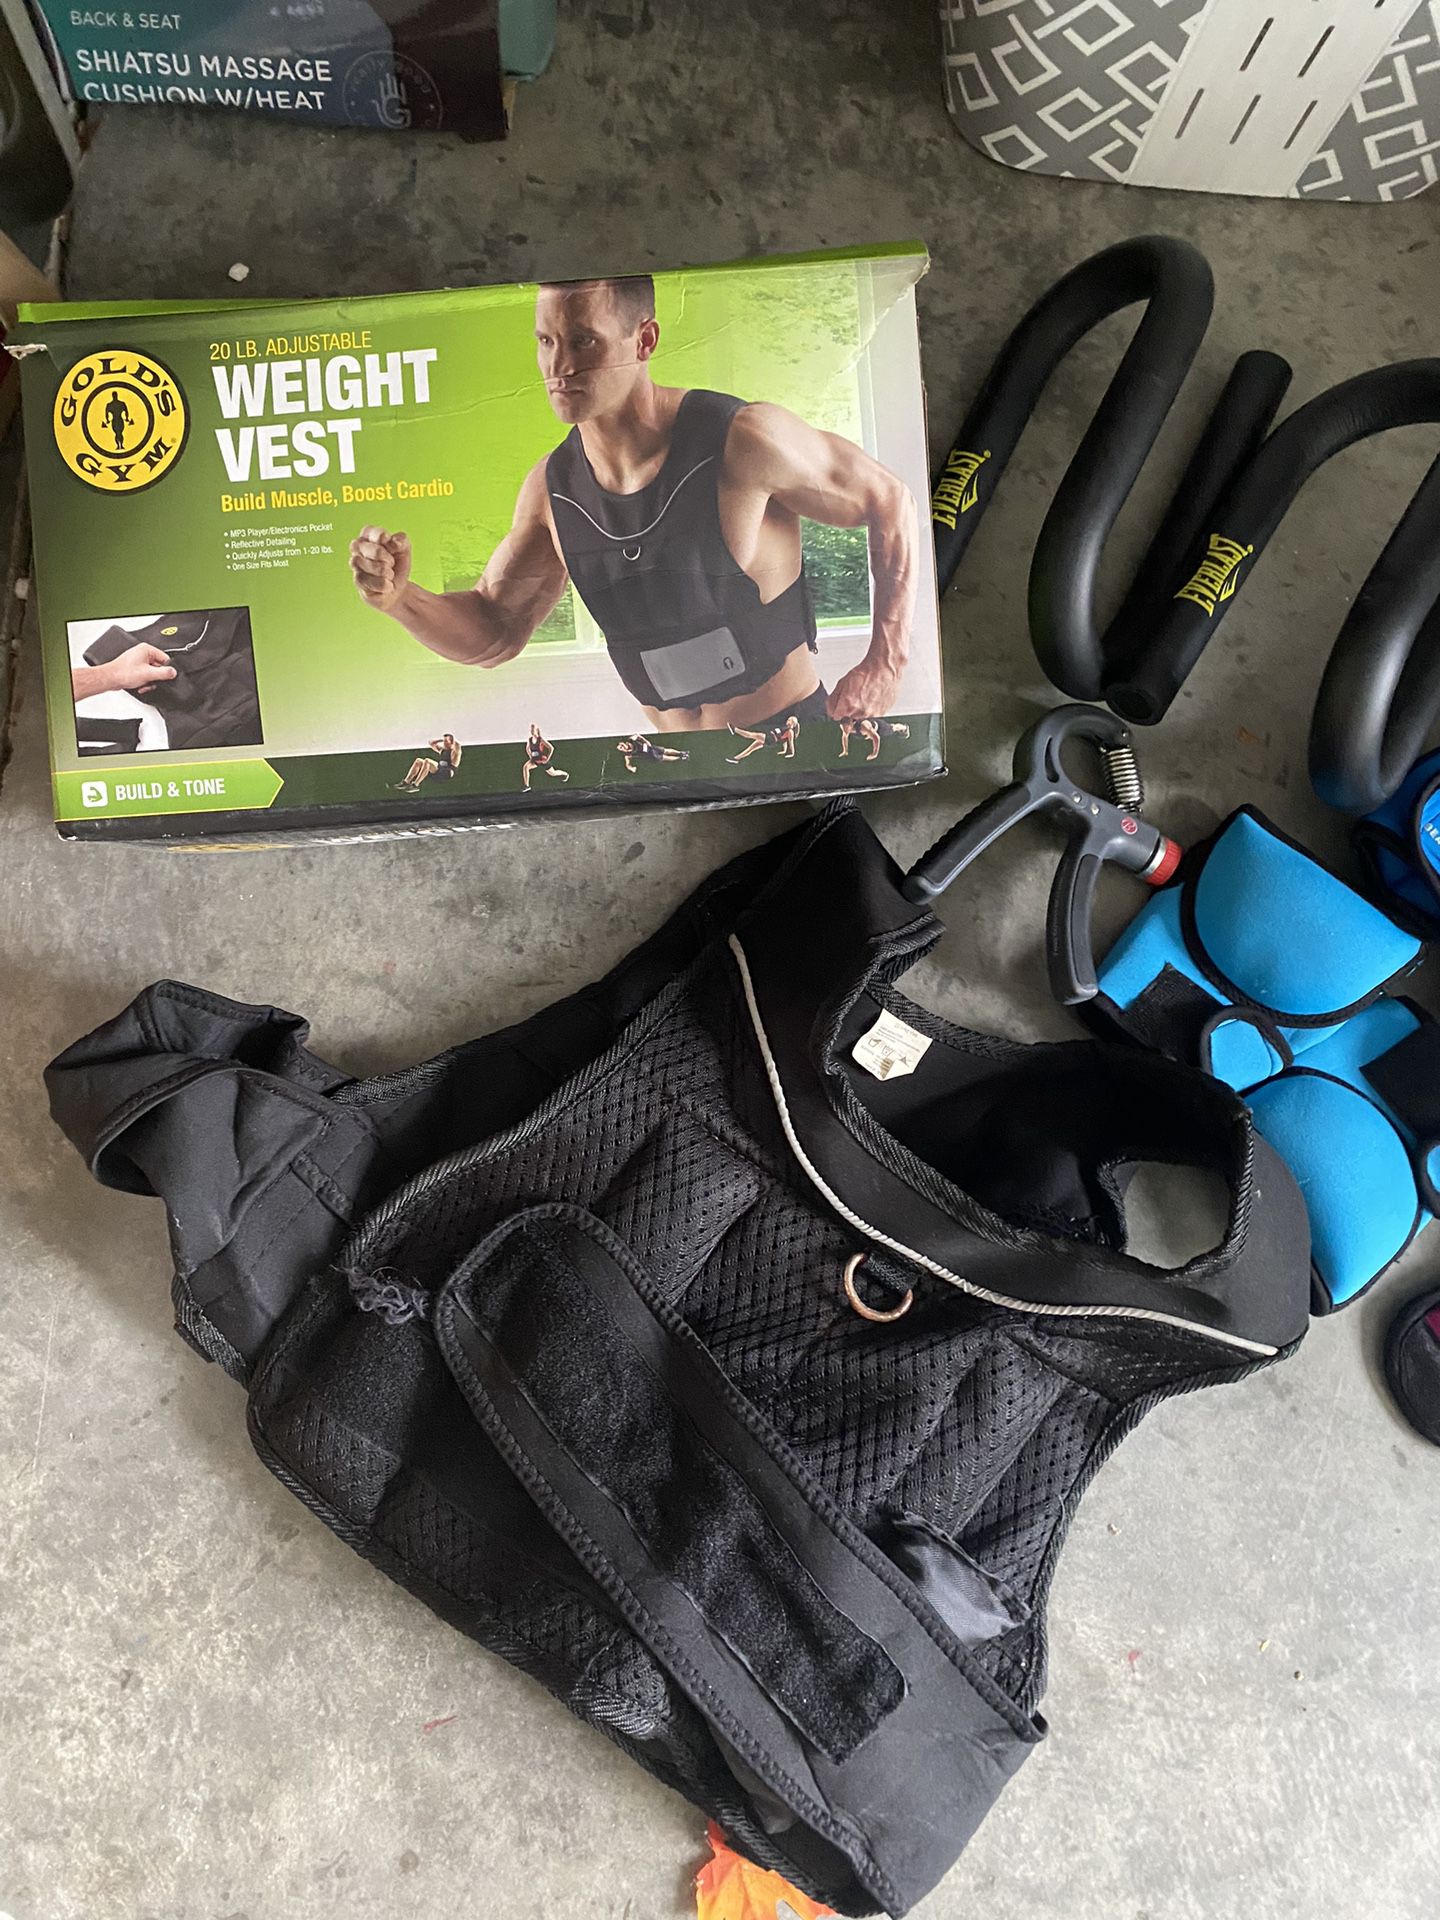 Weighted Vest And Exercise  Equipment